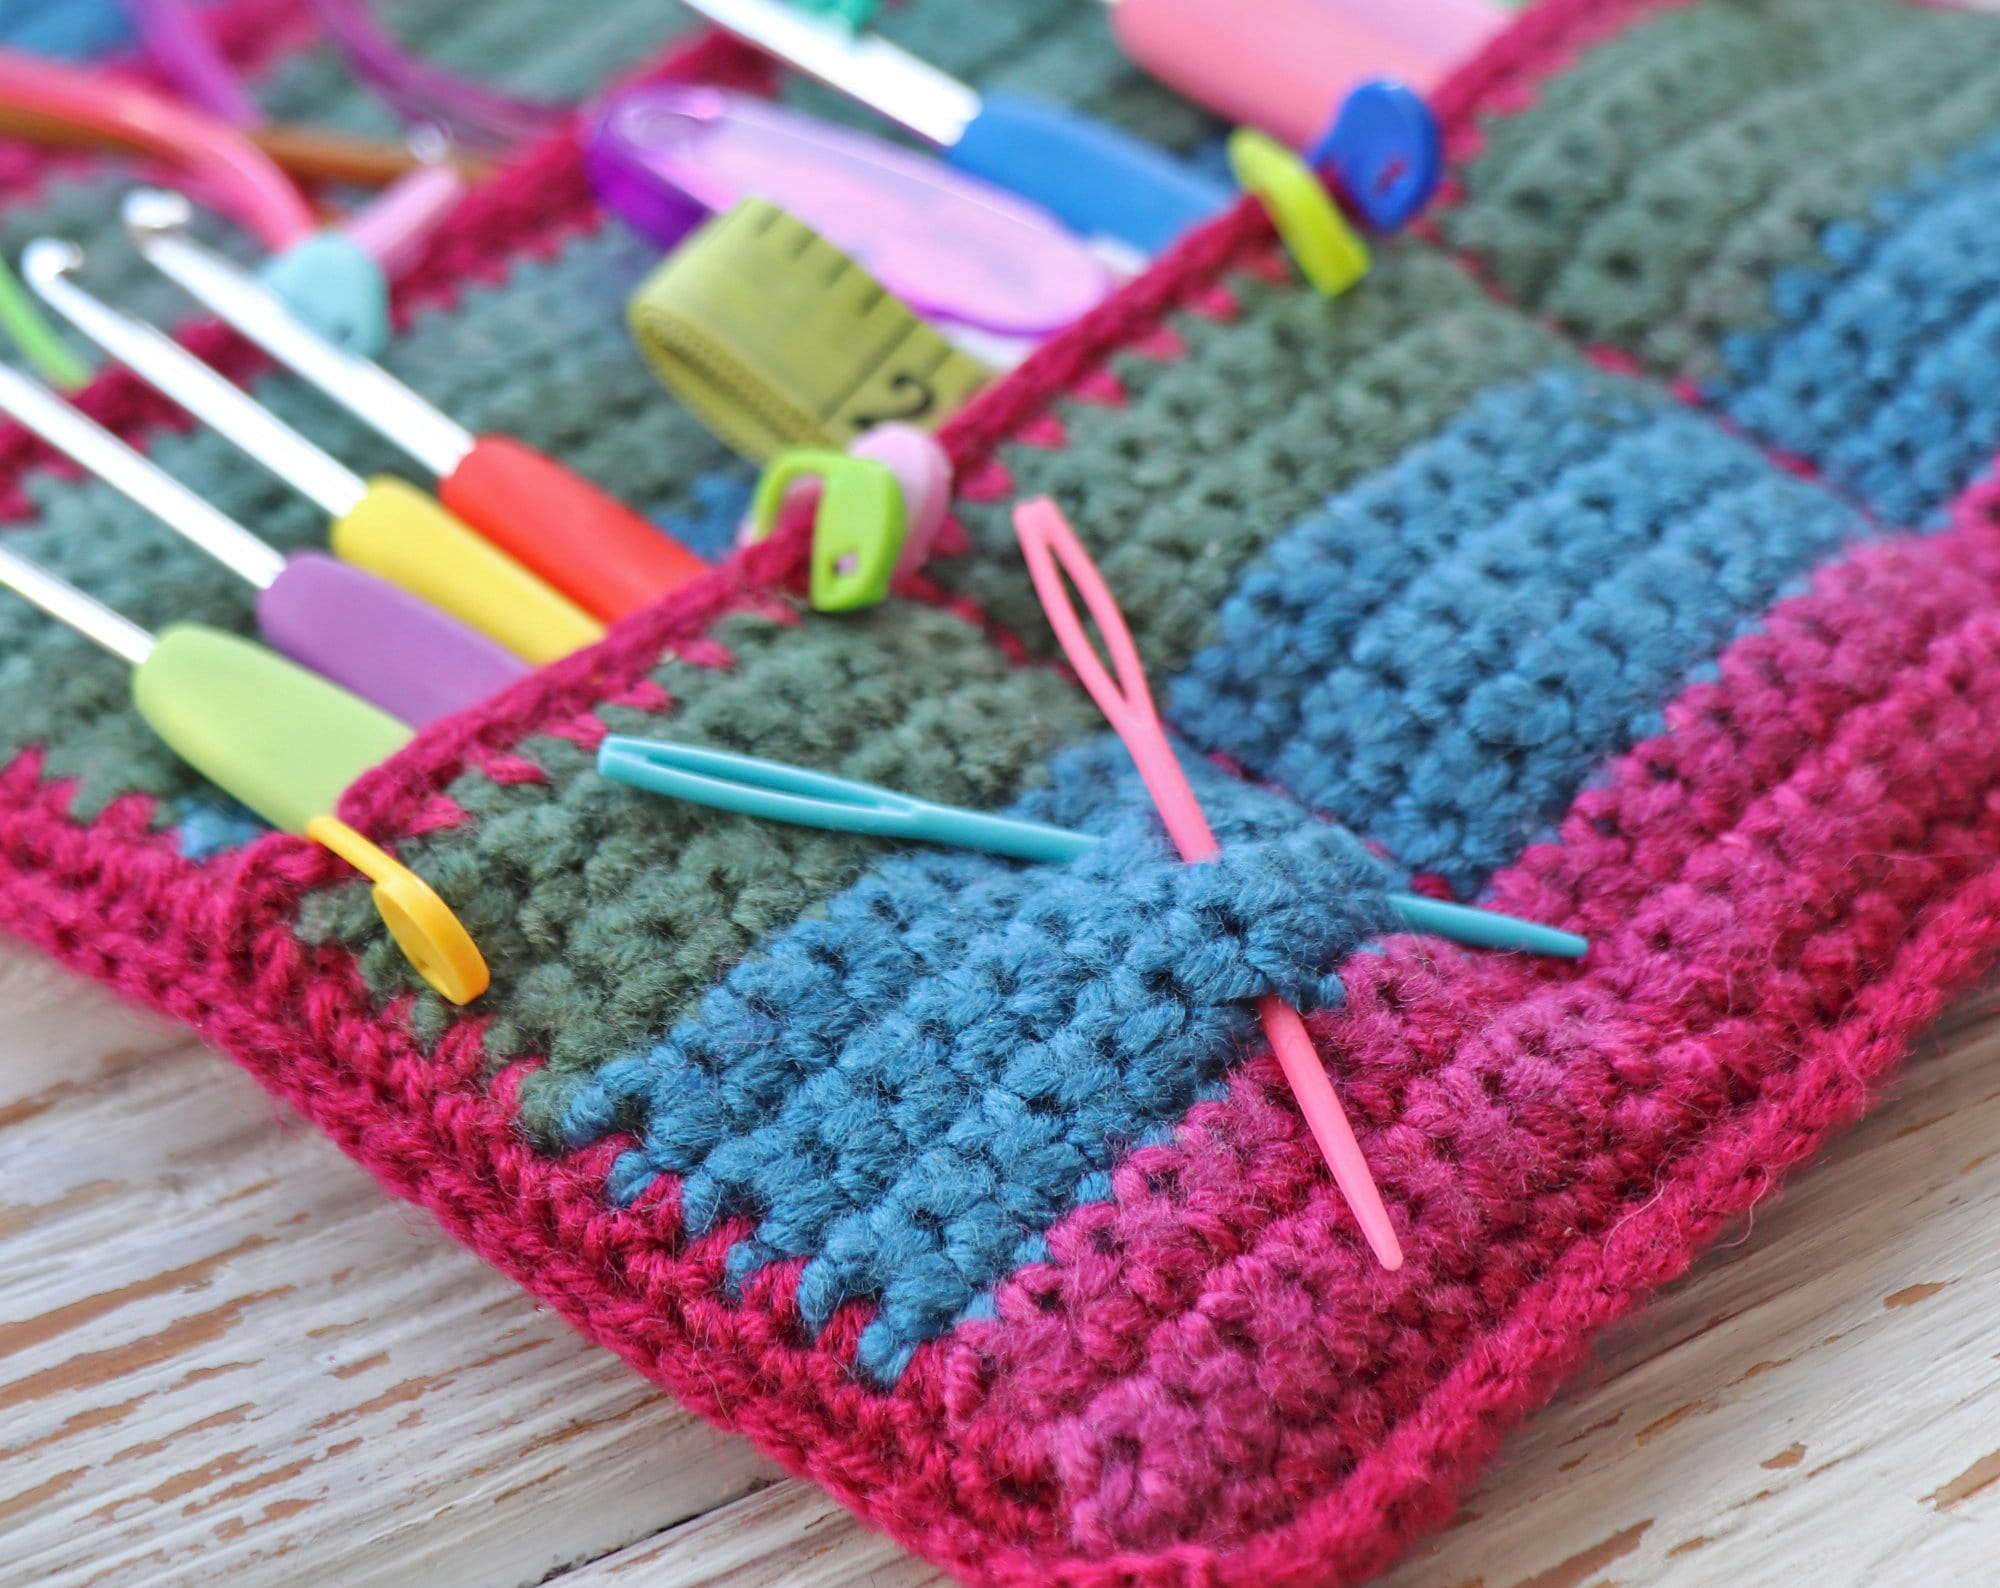 Quick, Easy, affordable crochet hook comfy covers 